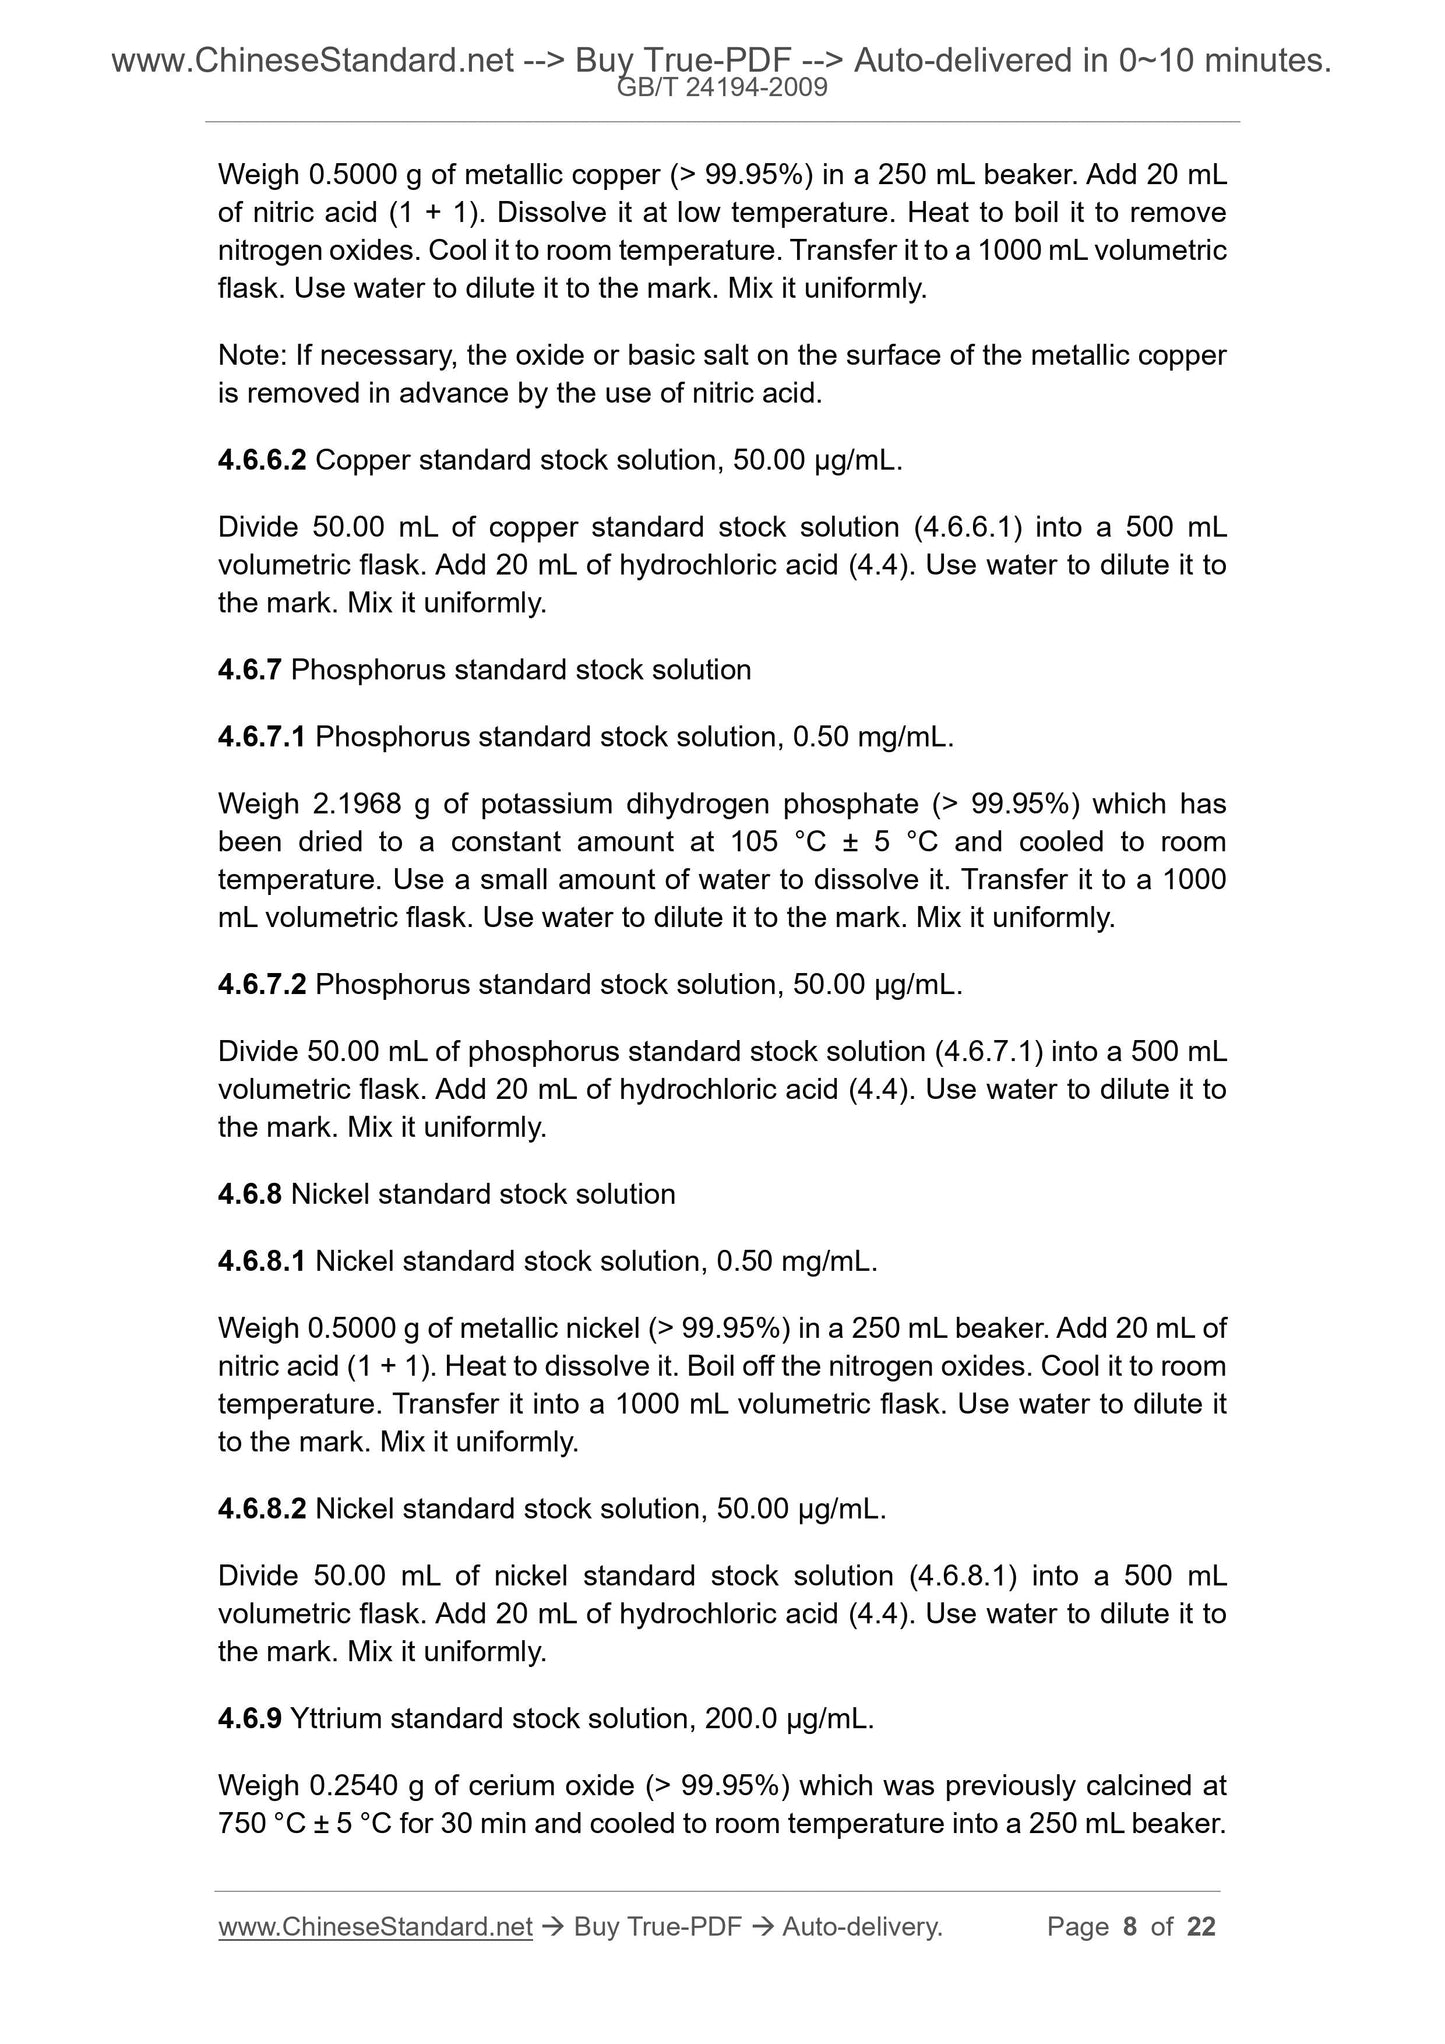 GB/T 24194-2009 Page 5